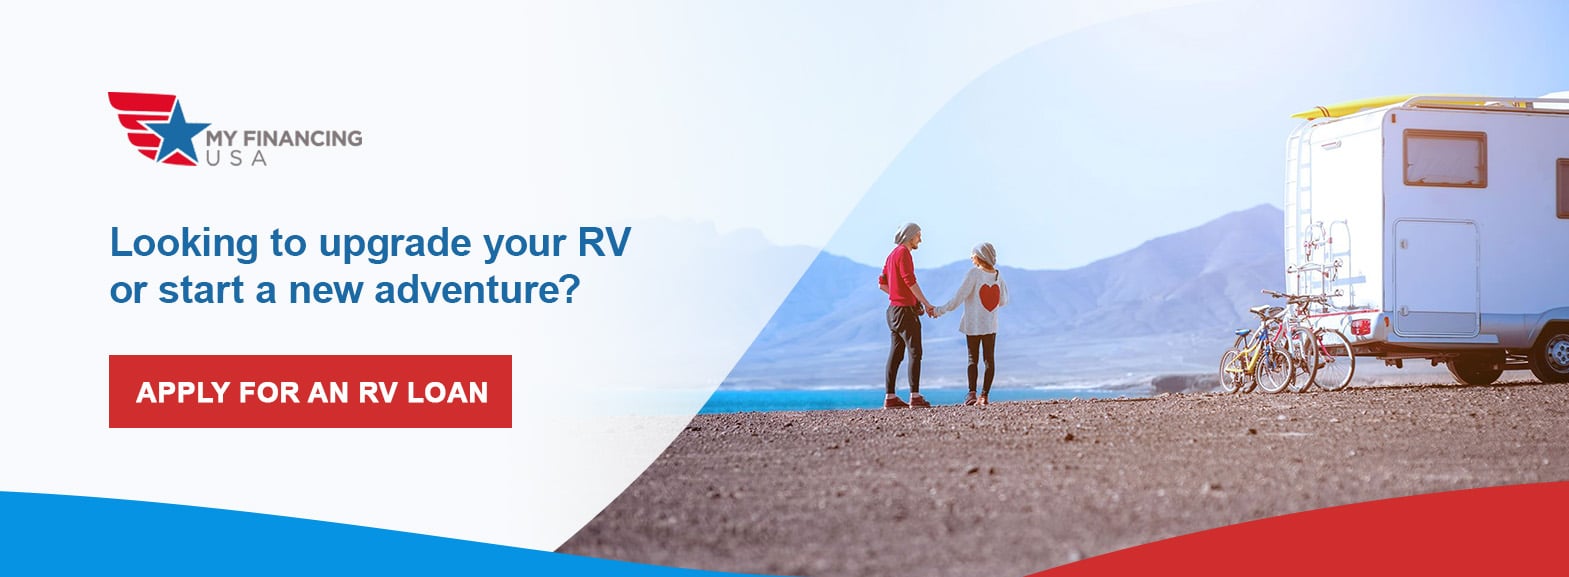 Looking to upgrade your RV or start a new adventure? Apply for an RV Loan With My Financing USA!